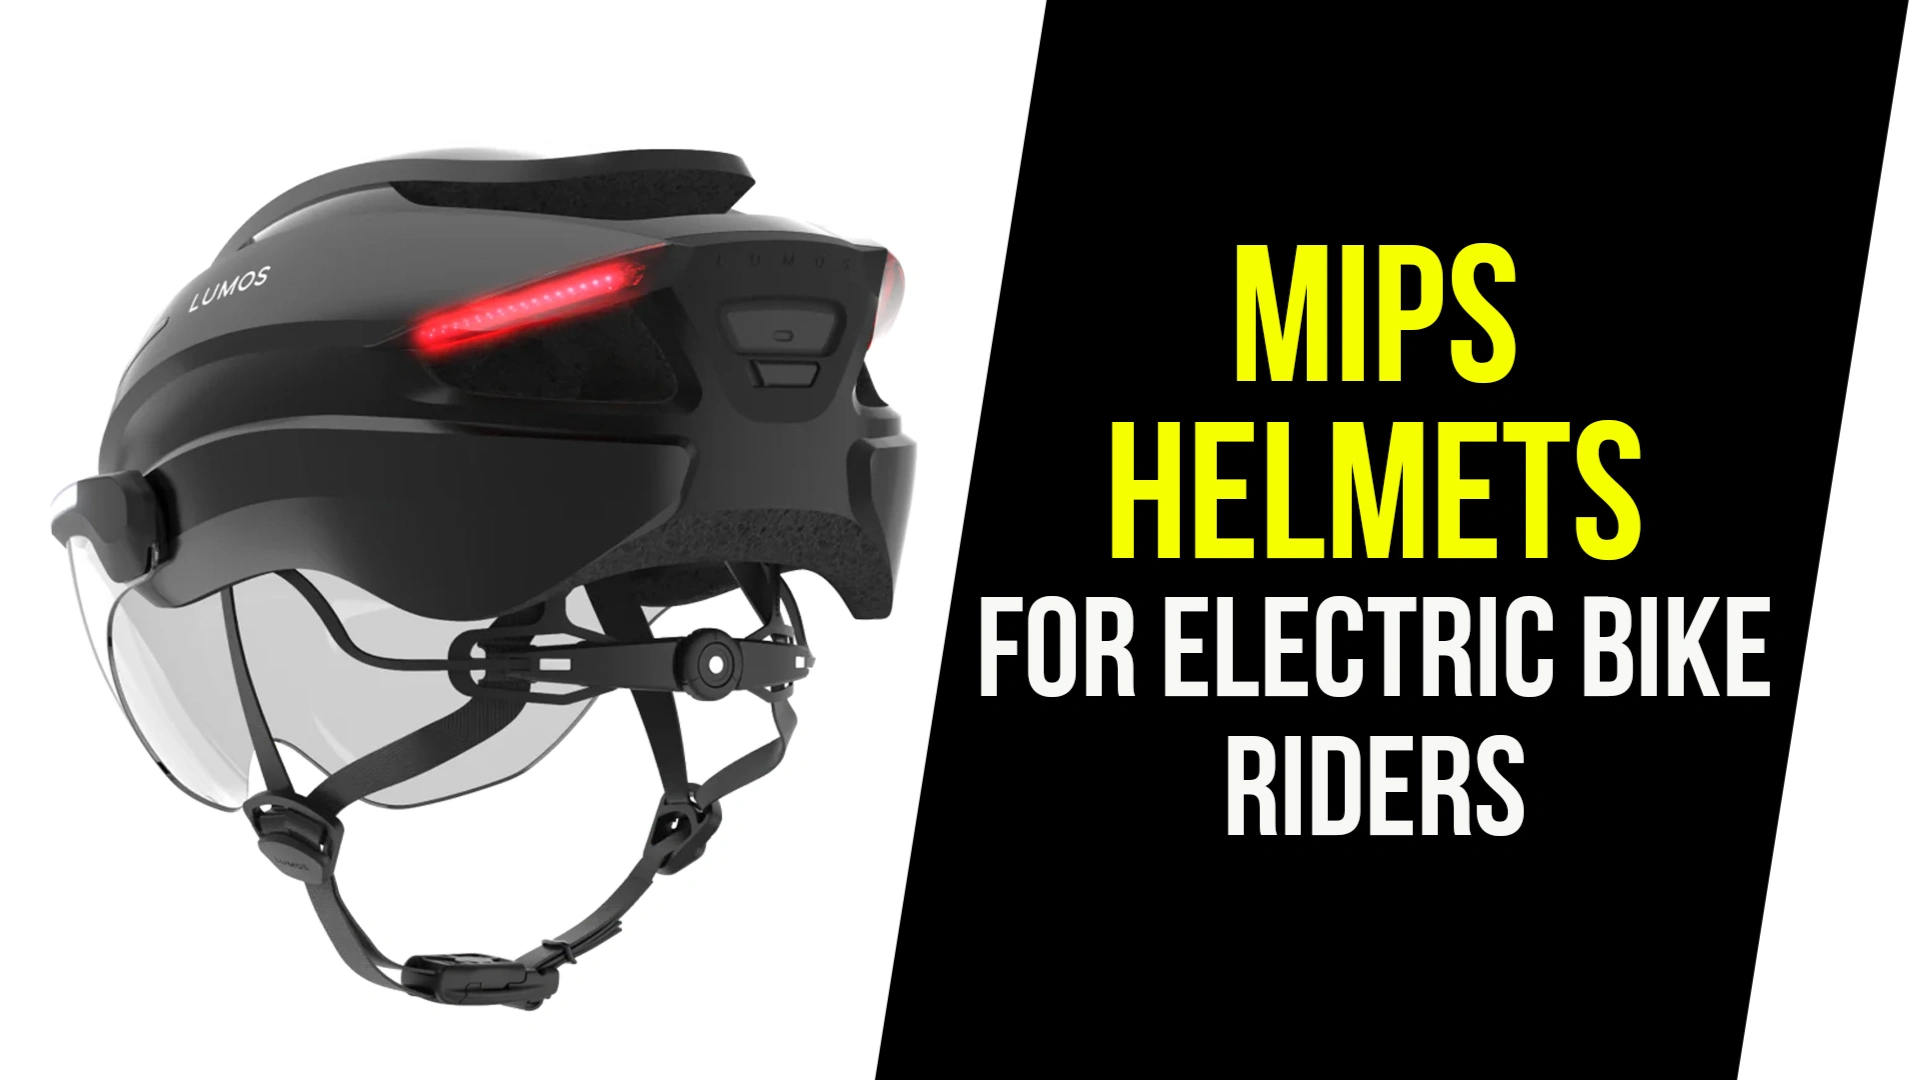 MIPS Helmets for EBikes : The Next Level in eBike Safety